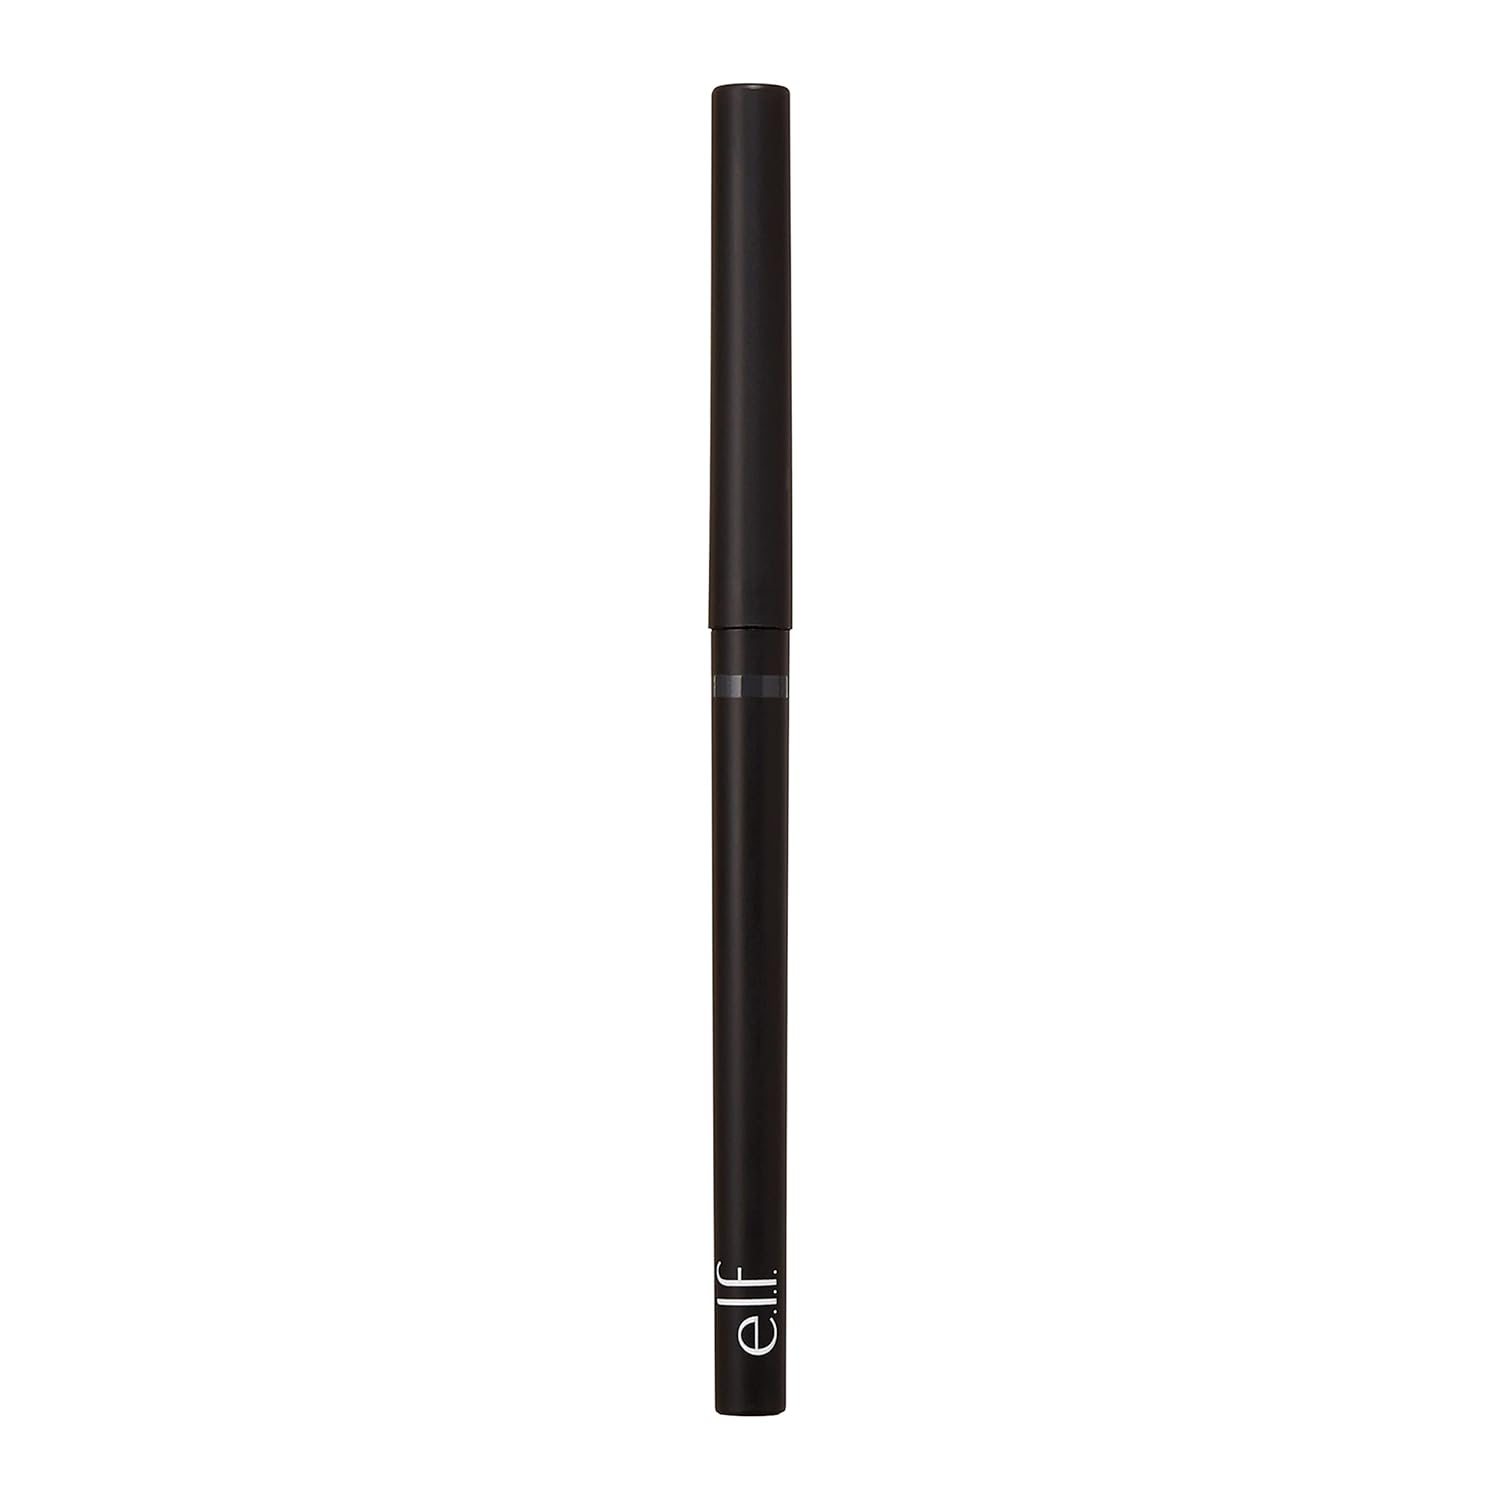 e.l.f., No Budge Retractable Eyeliner, Creamy, Ultra-Pigmented, Long Lasting, Enhances, Defines, Intensifies, Boldens, Grey, All-Day Wear, 0.006